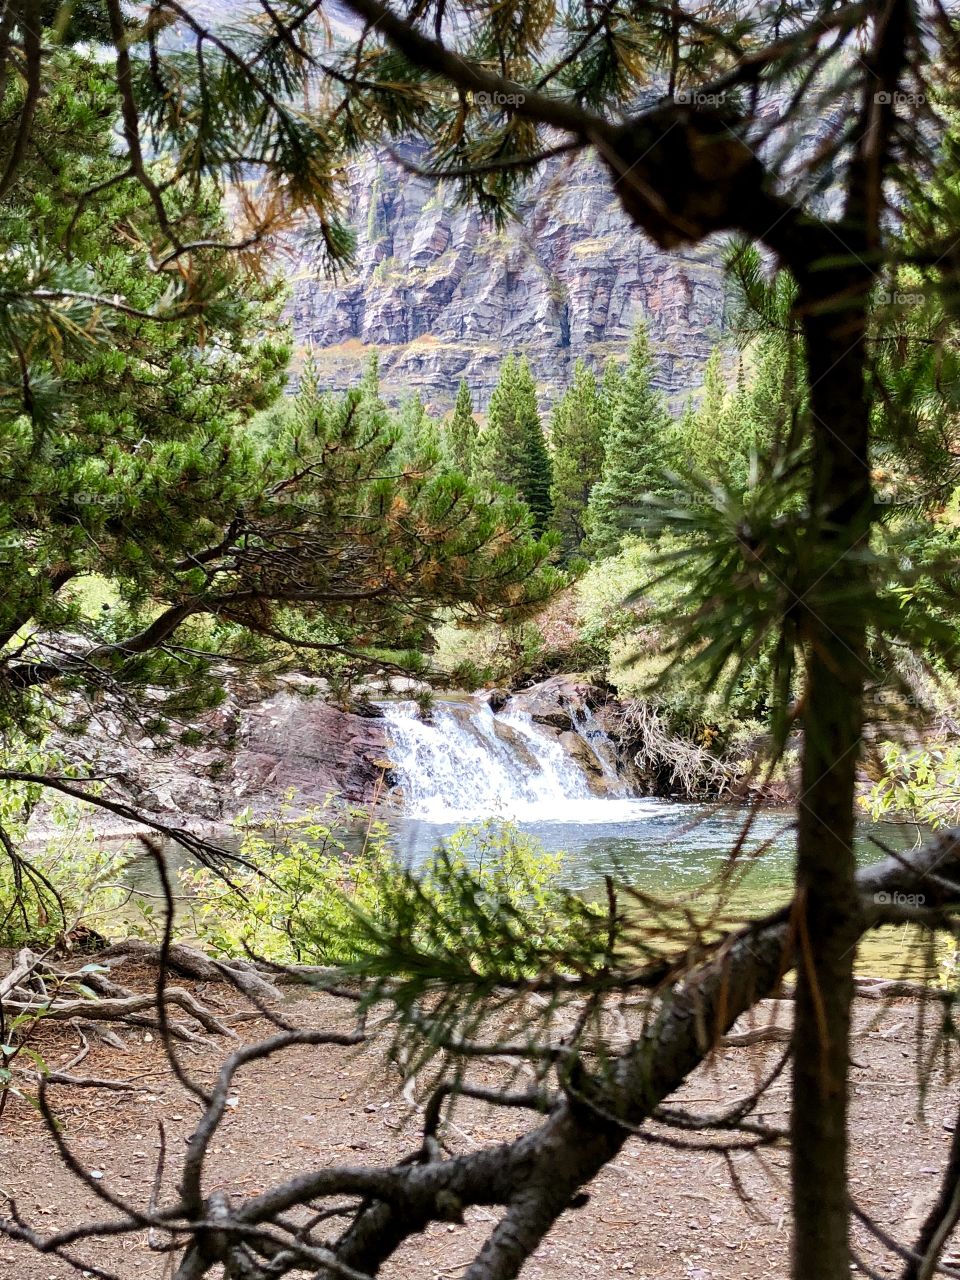 Waterfall through the Pines